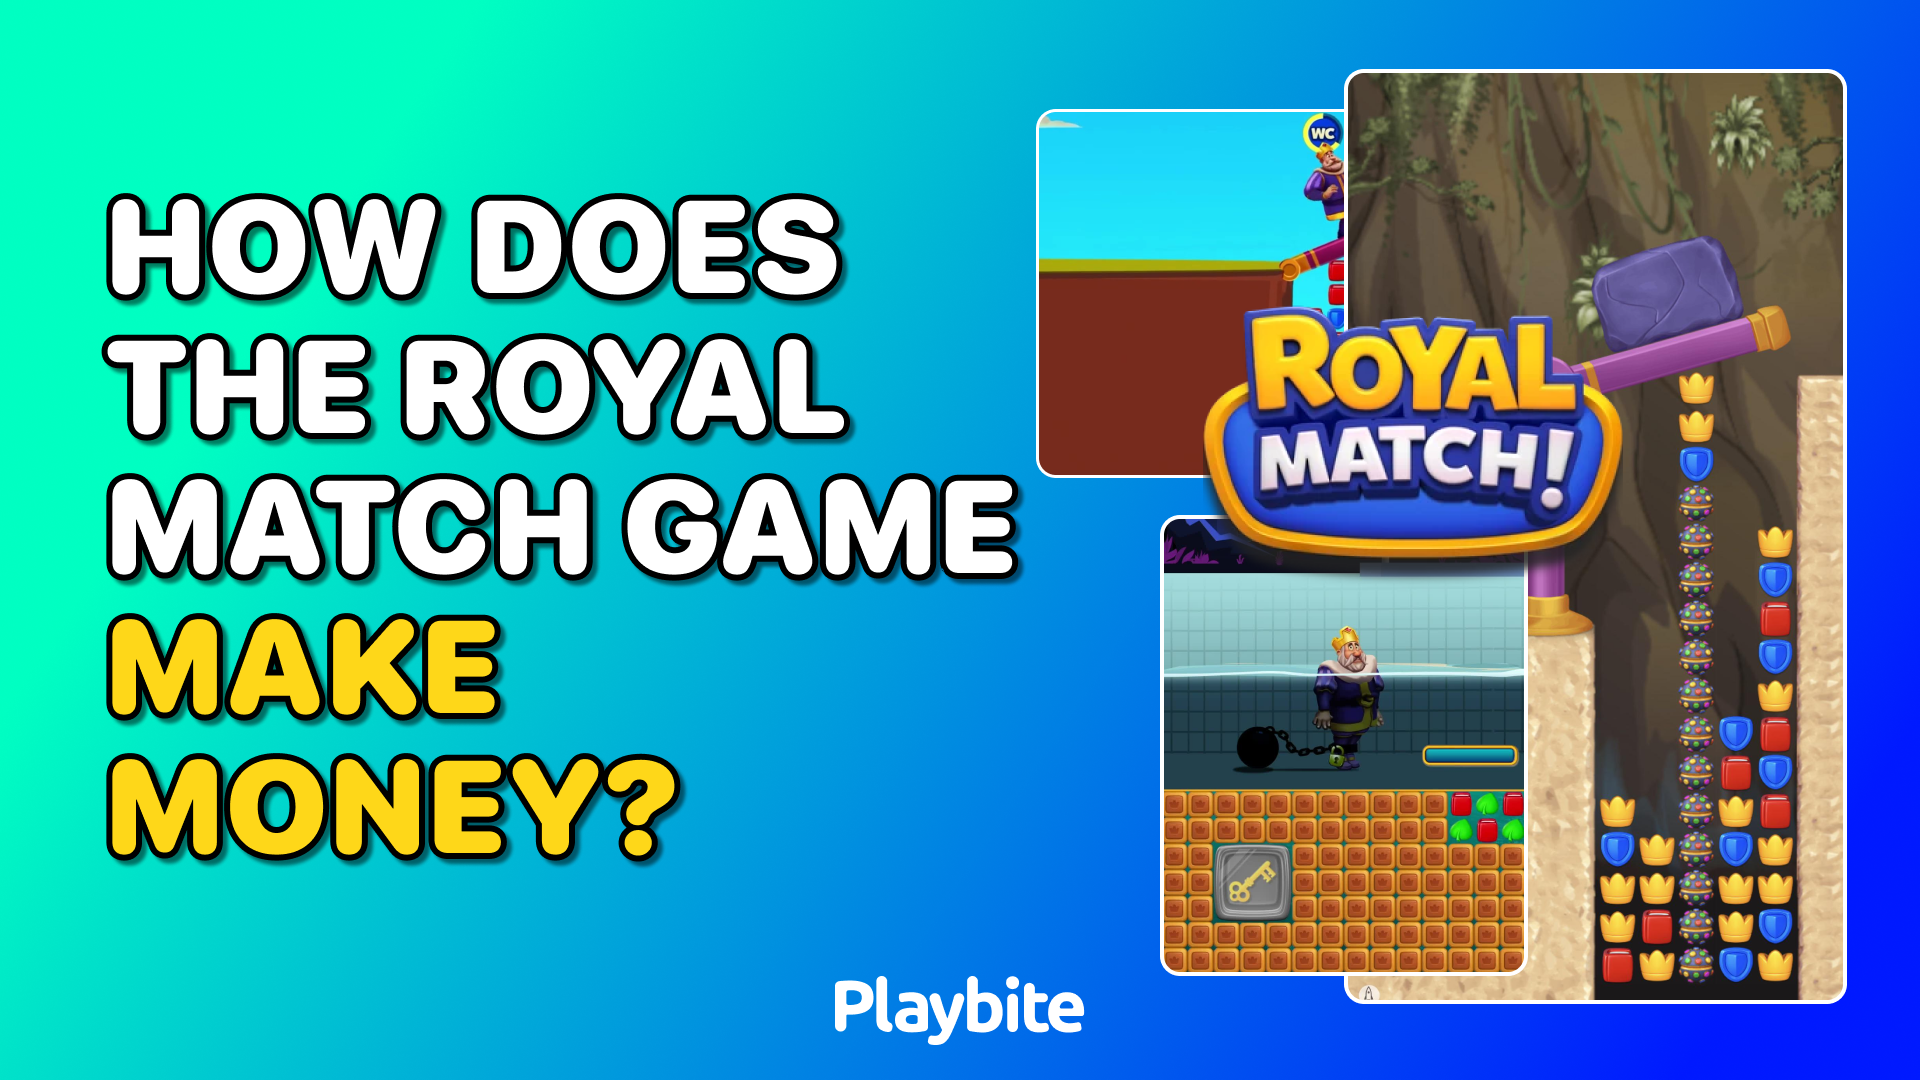 How Does the Royal Match Game Make Money?